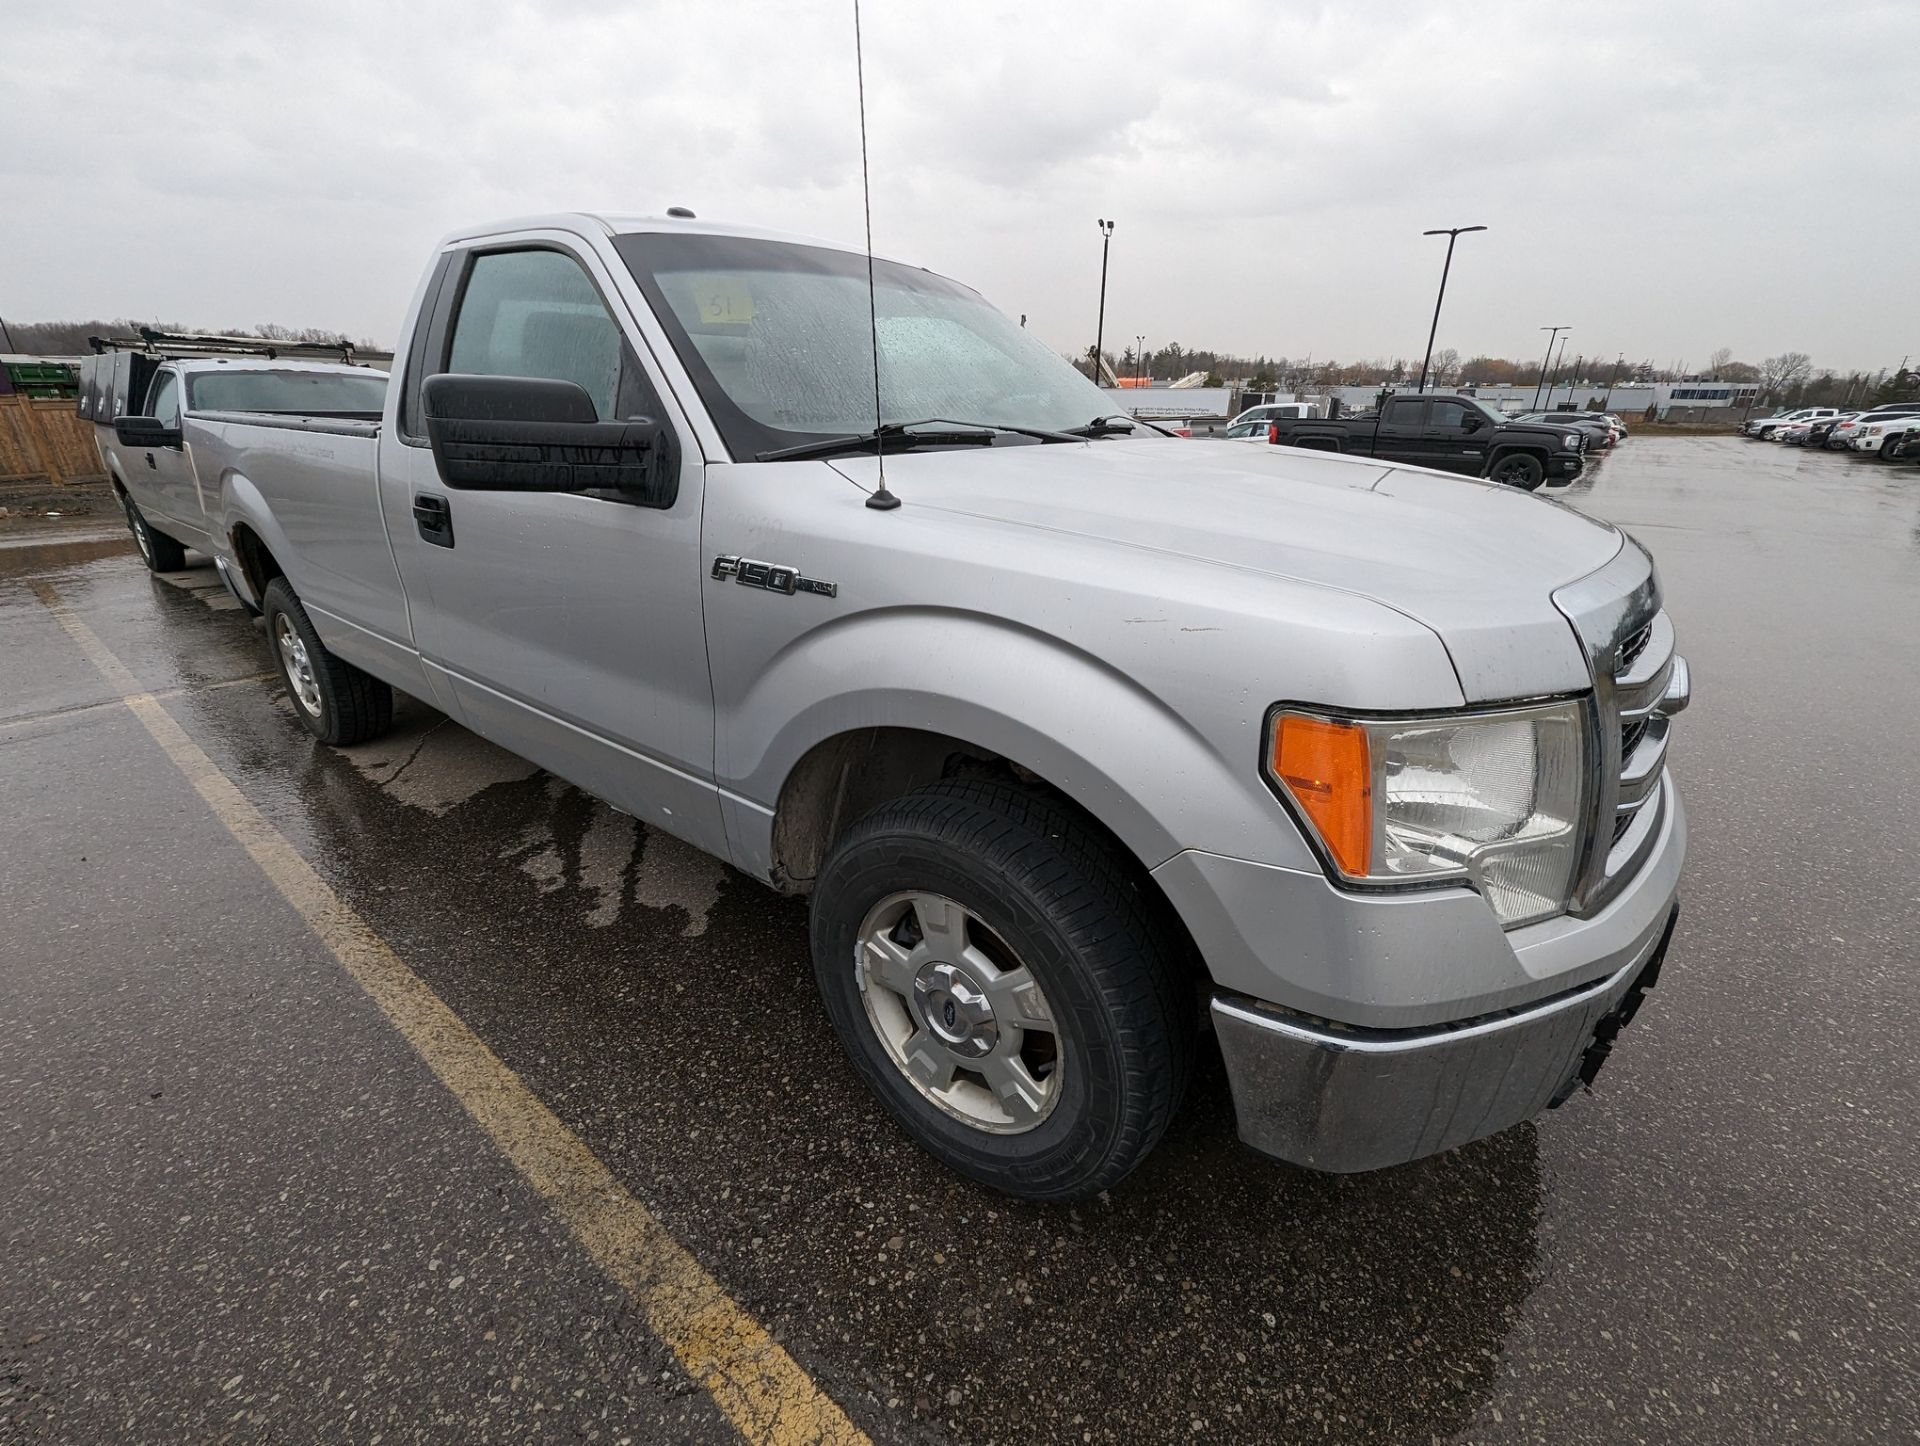 2013 FORD F150 XLT PICKUP TRUCK, VIN# 1FTNF1CFXDKF50570, APPROX. 423,552KMS (NO BLACK TOOL BOXES) - Image 3 of 9